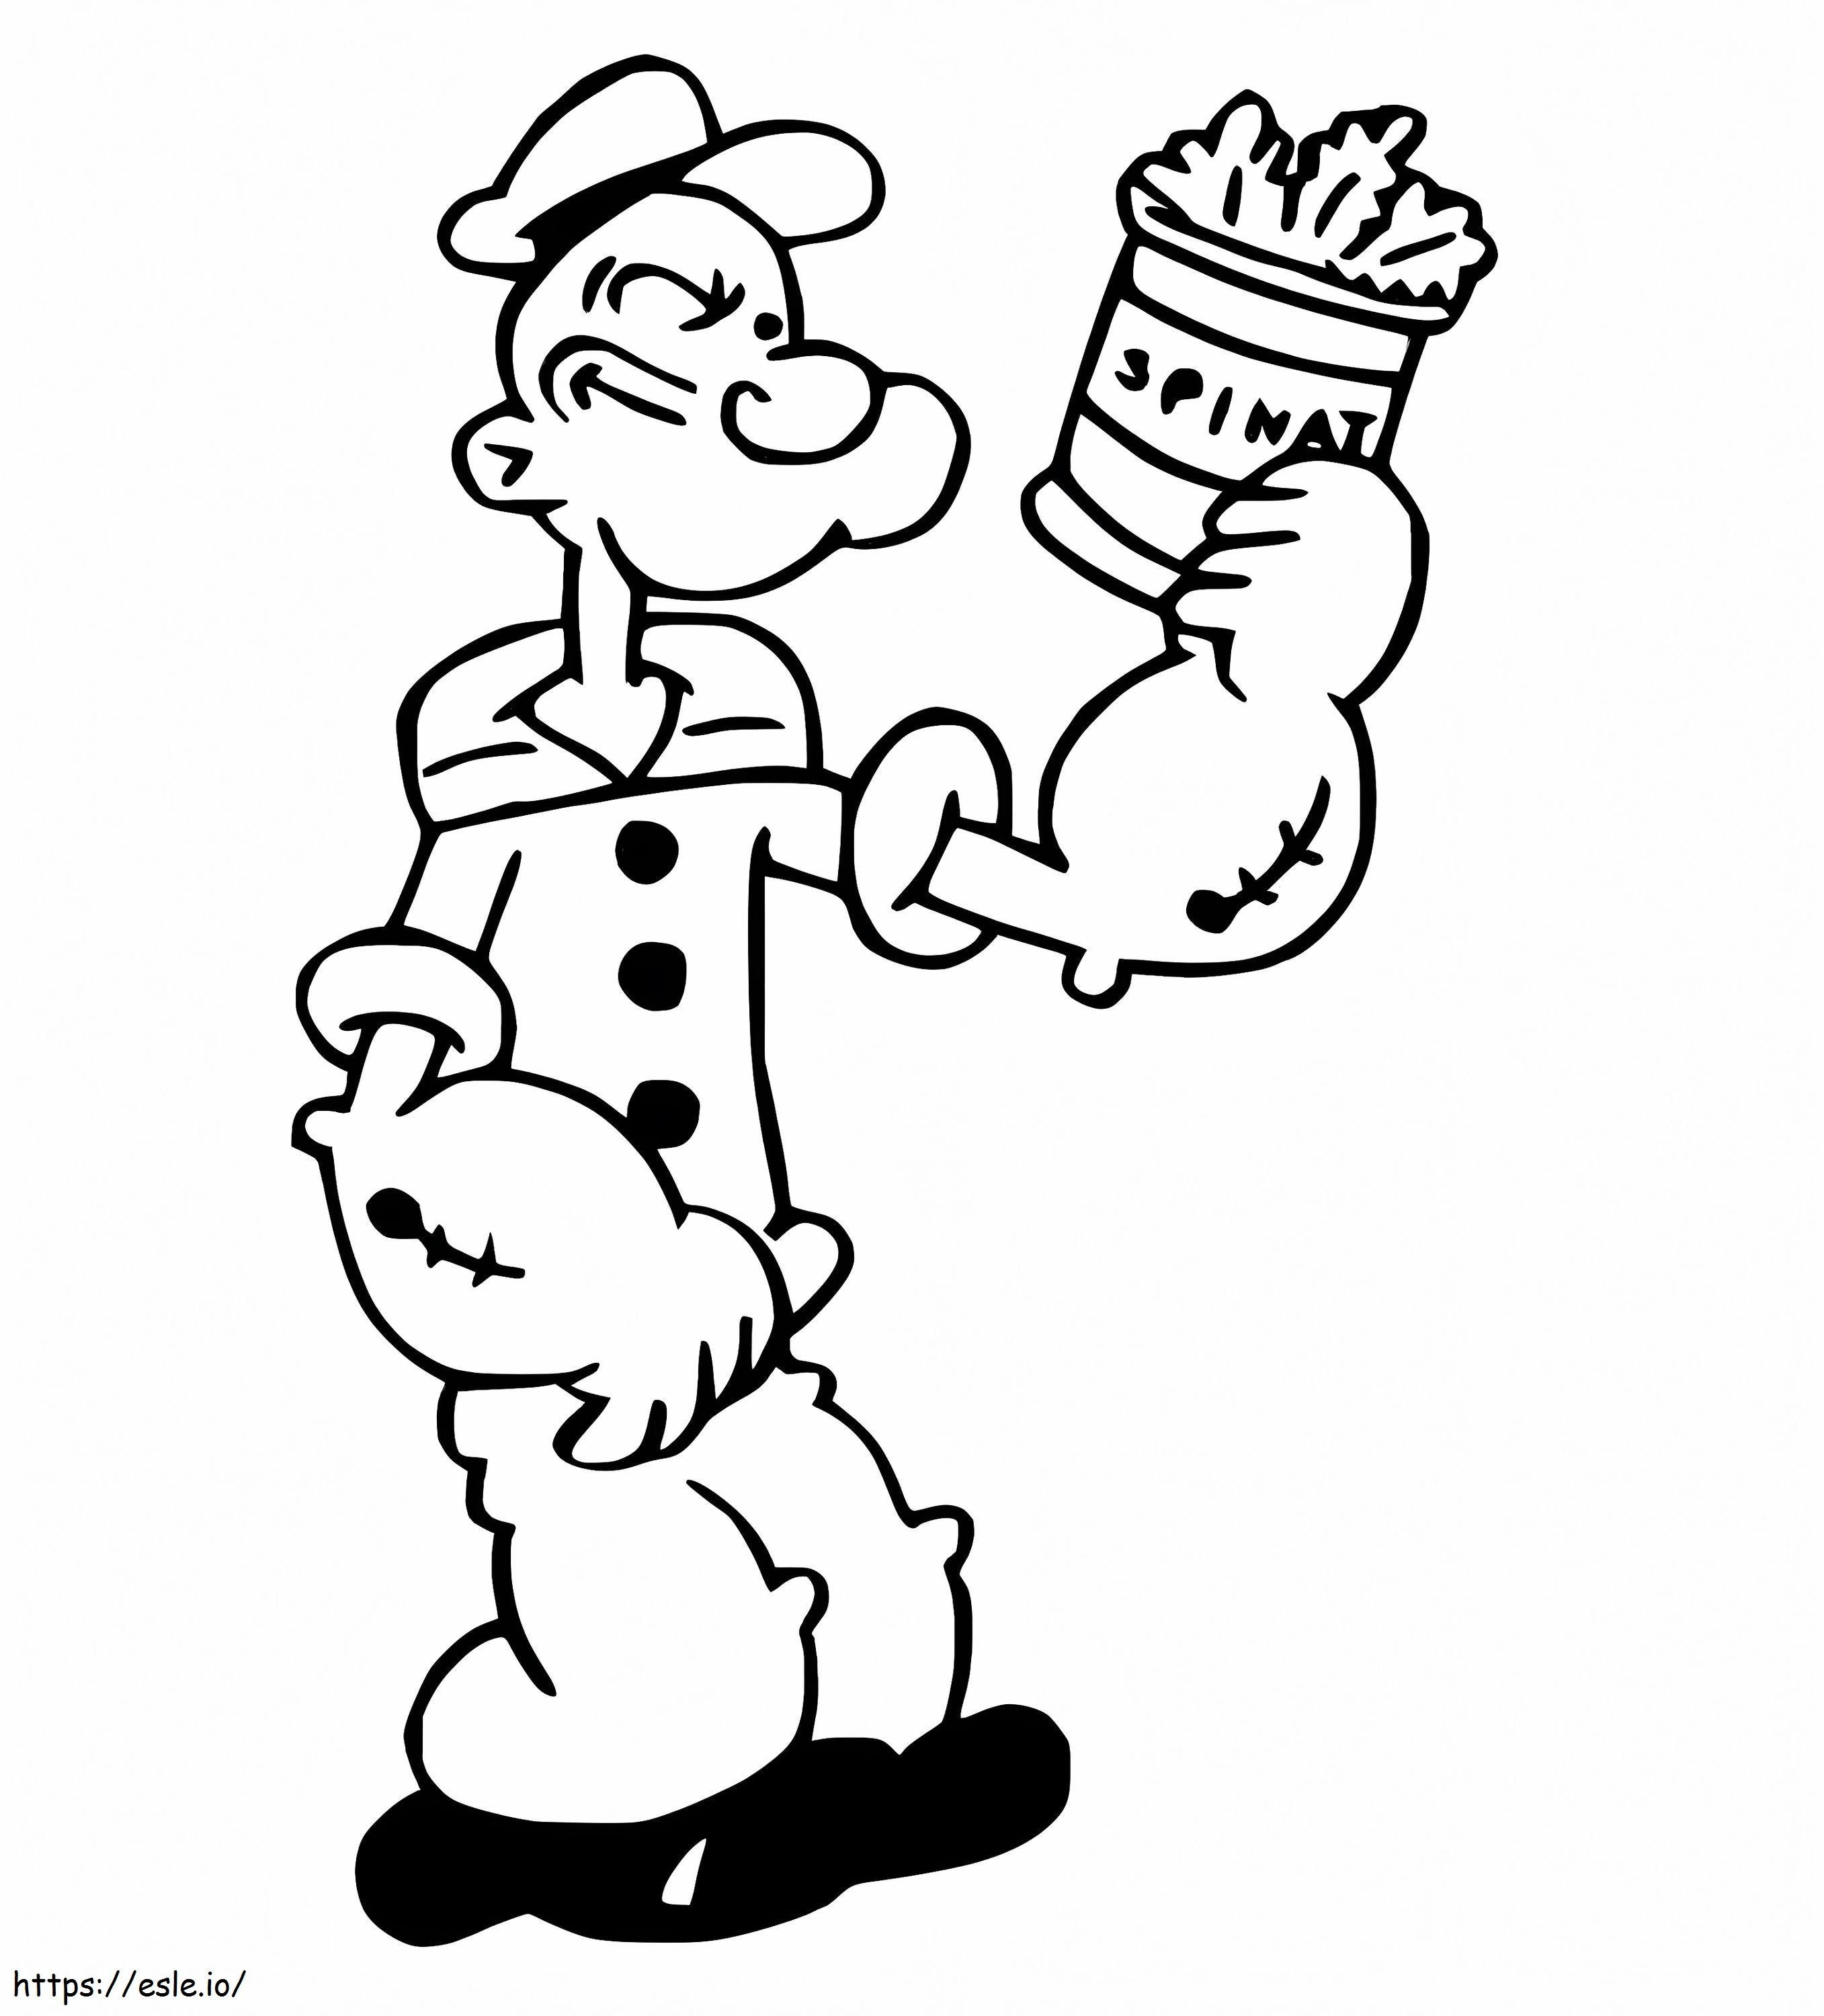 Popeye And Spinach coloring page